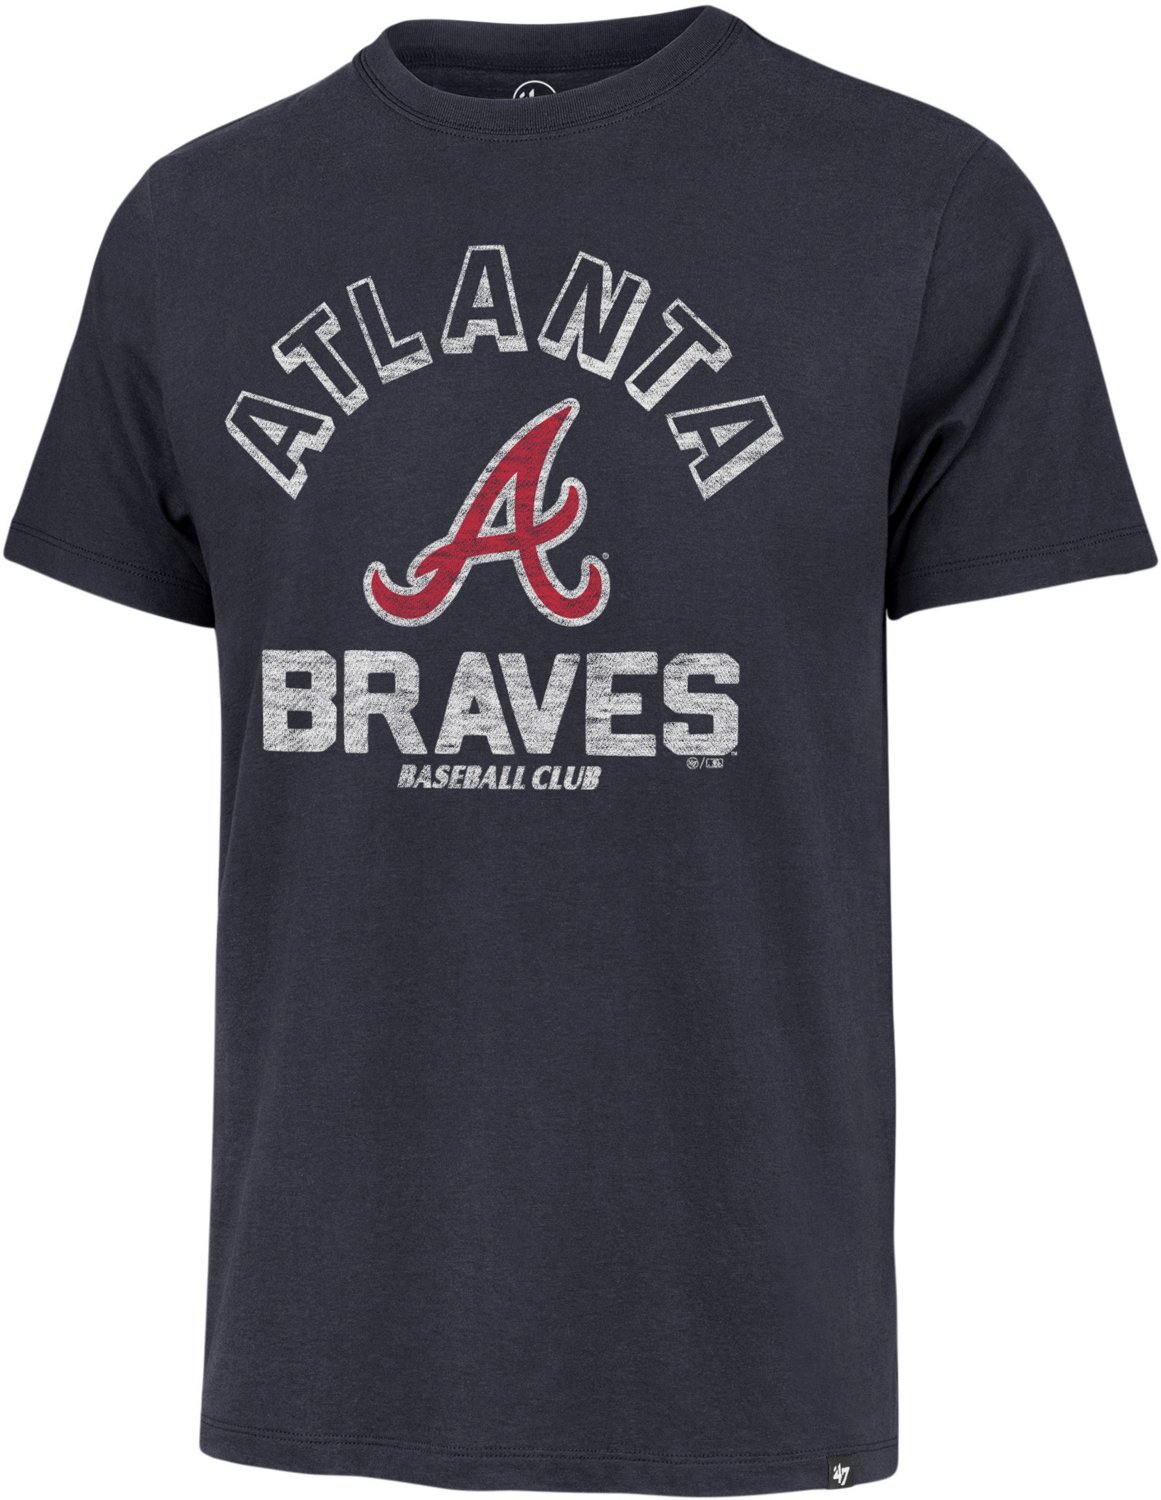 The '47 Atlanta Braves Arch Over Name Retrograde Franklin T-shirt features  a team design and a cotton/polyester fabric.